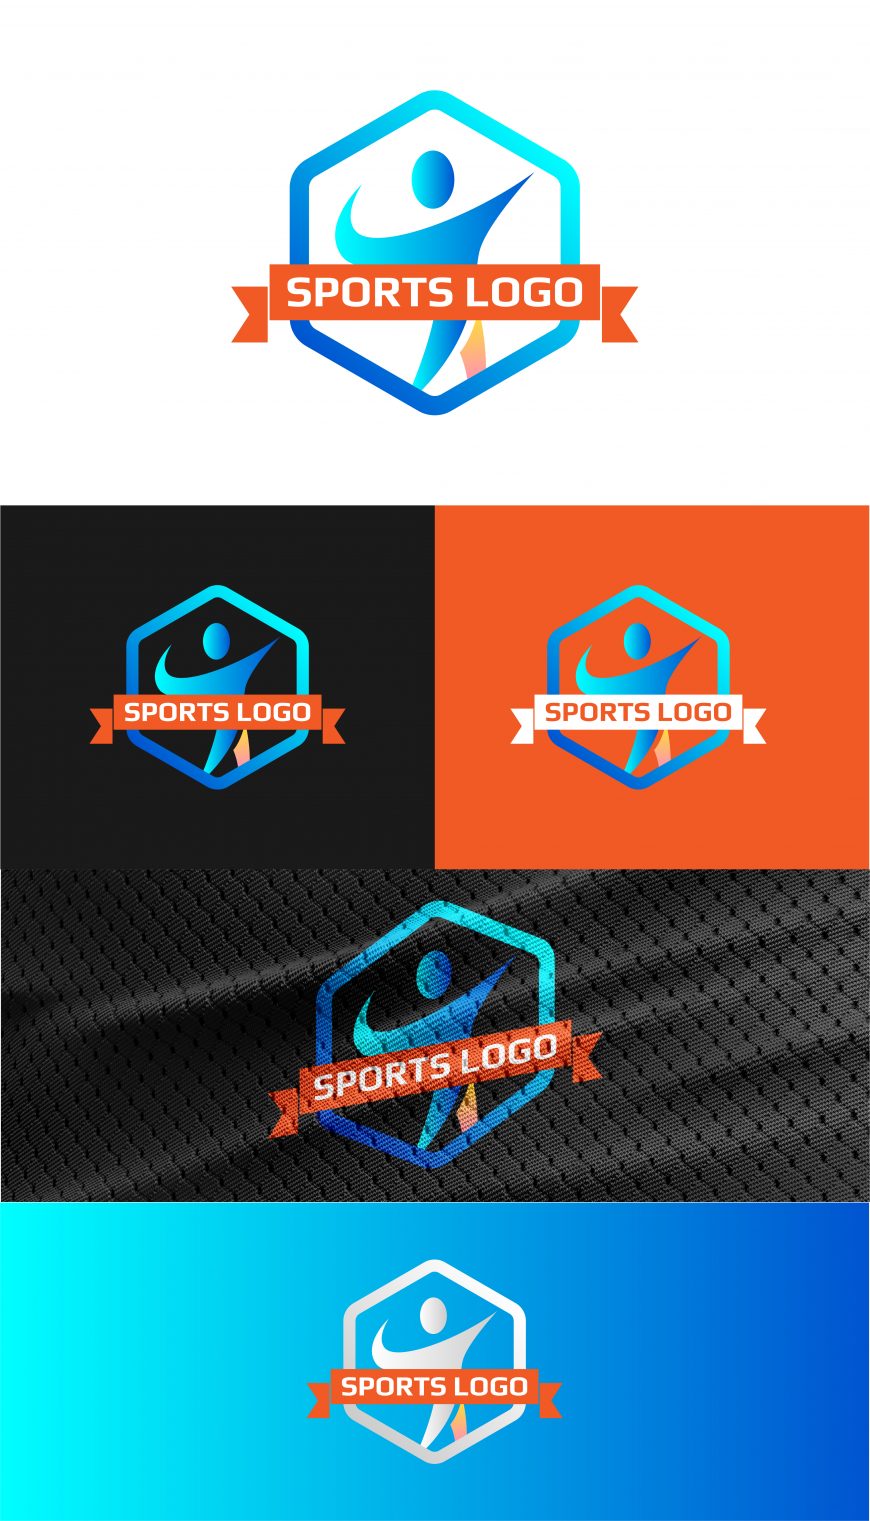 SPORTS-LOGO-TEMPLATE-scaled